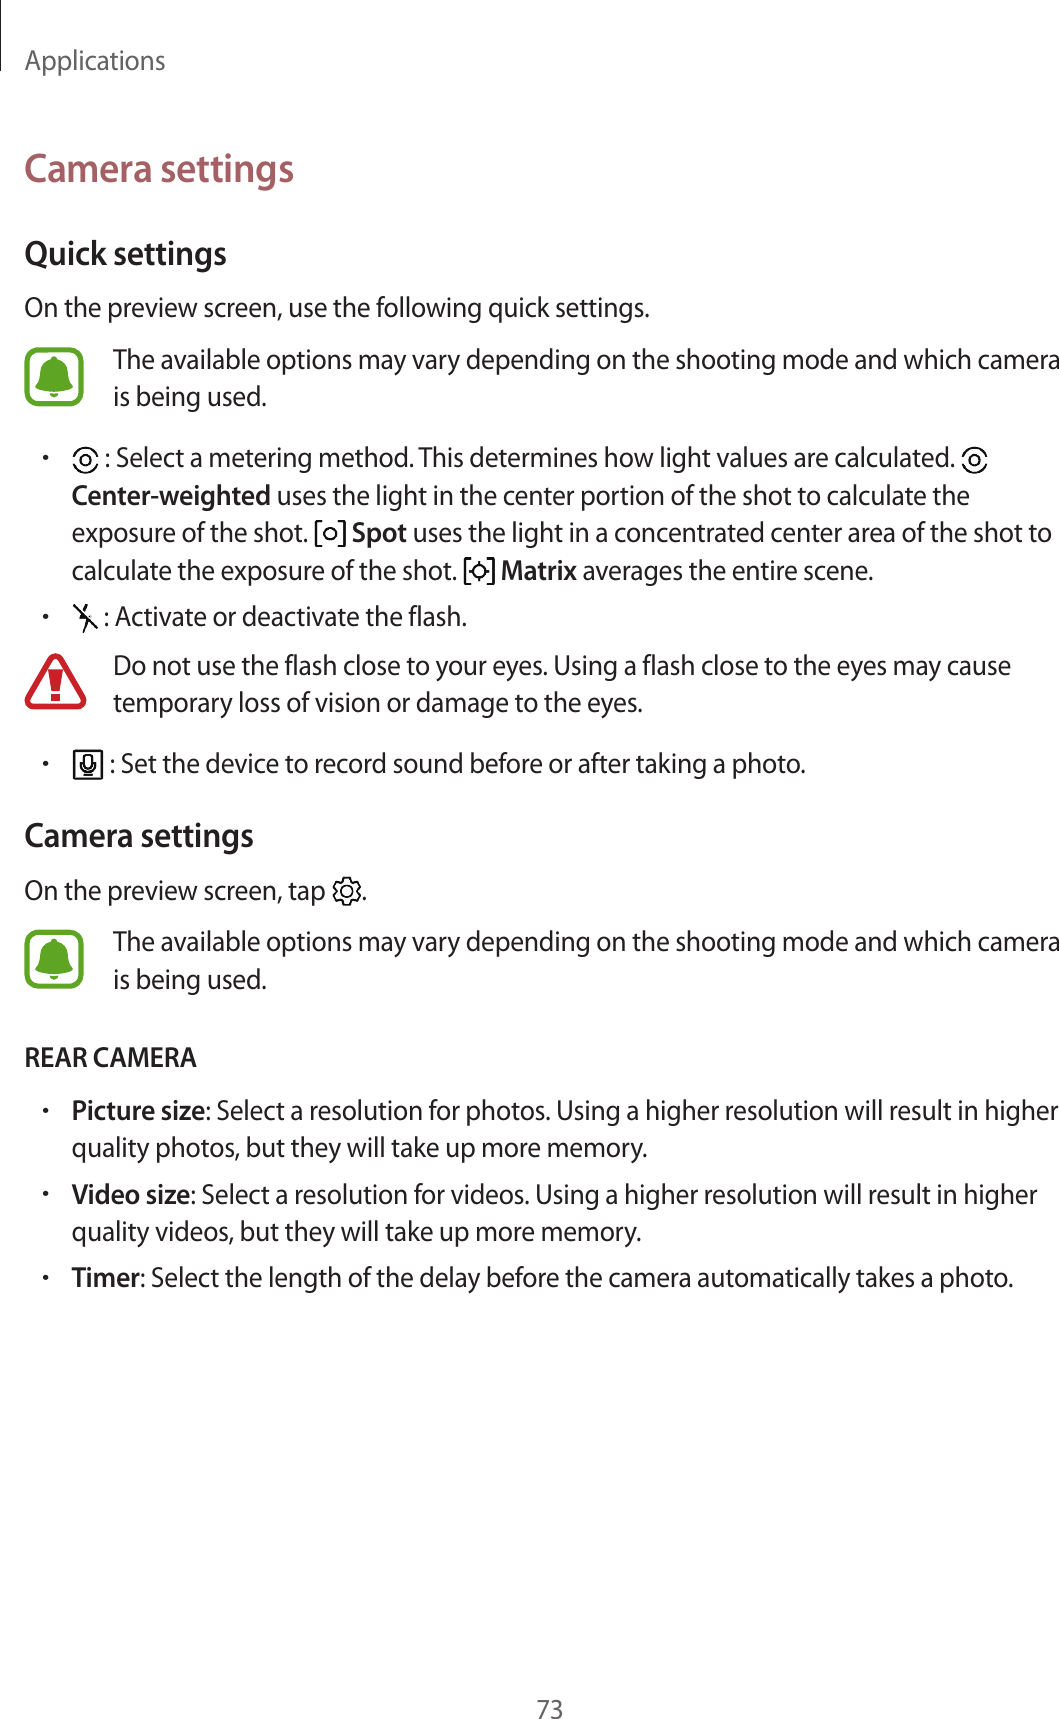 Applications73Camera settingsQuick settingsOn the preview screen, use the following quick settings.The available options may vary depending on the shooting mode and which camera is being used.• : Select a metering method. This determines how light values are calculated.   Center-weighted uses the light in the center portion of the shot to calculate the exposure of the shot.   Spot uses the light in a concentrated center area of the shot to calculate the exposure of the shot.   Matrix averages the entire scene.• : Activate or deactivate the flash.Do not use the flash close to your eyes. Using a flash close to the eyes may cause temporary loss of vision or damage to the eyes.• : Set the device to record sound before or after taking a photo.Camera settingsOn the preview screen, tap  .The available options may vary depending on the shooting mode and which camera is being used.REAR CAMERA•Picture size: Select a resolution for photos. Using a higher resolution will result in higher quality photos, but they will take up more memory.•Video size: Select a resolution for videos. Using a higher resolution will result in higher quality videos, but they will take up more memory.•Timer: Select the length of the delay before the camera automatically takes a photo.